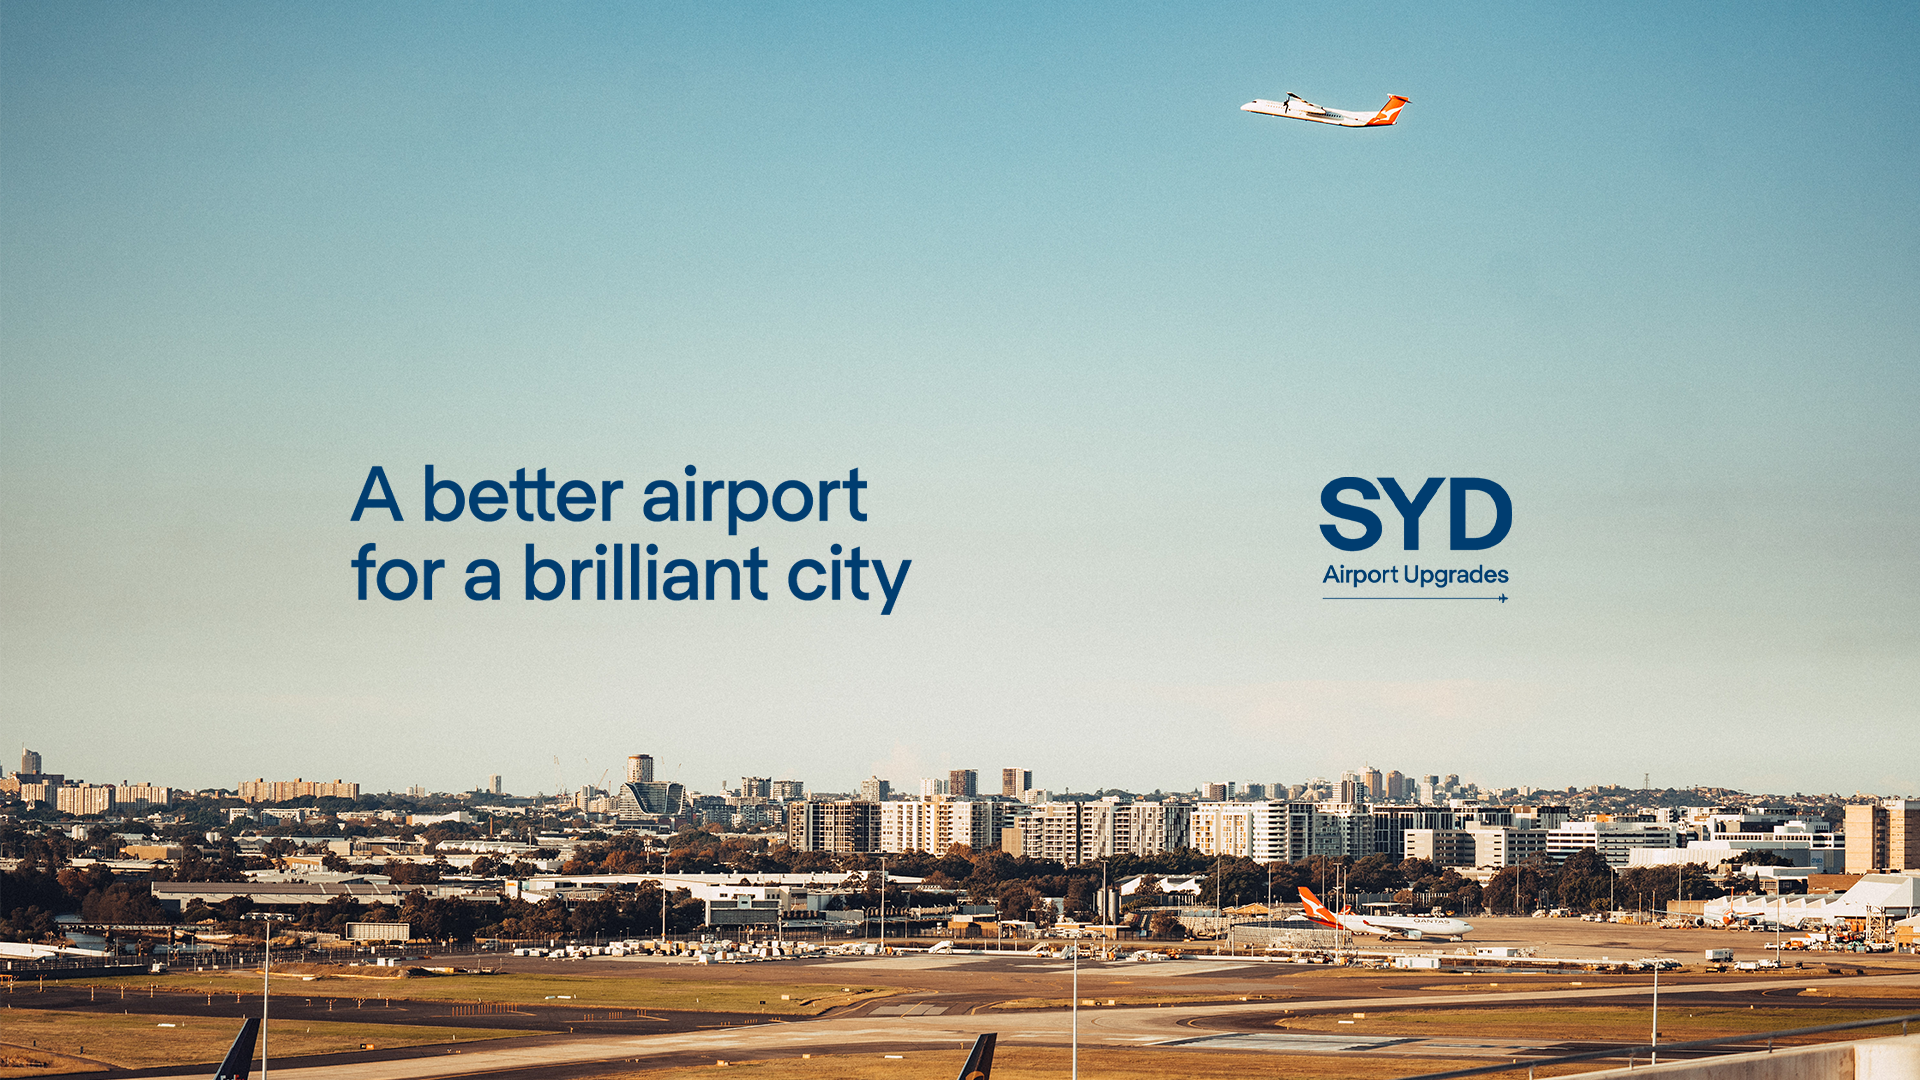 Image of Sydney Airport Runway with text in the middle saying: A better airport for a brilliant city